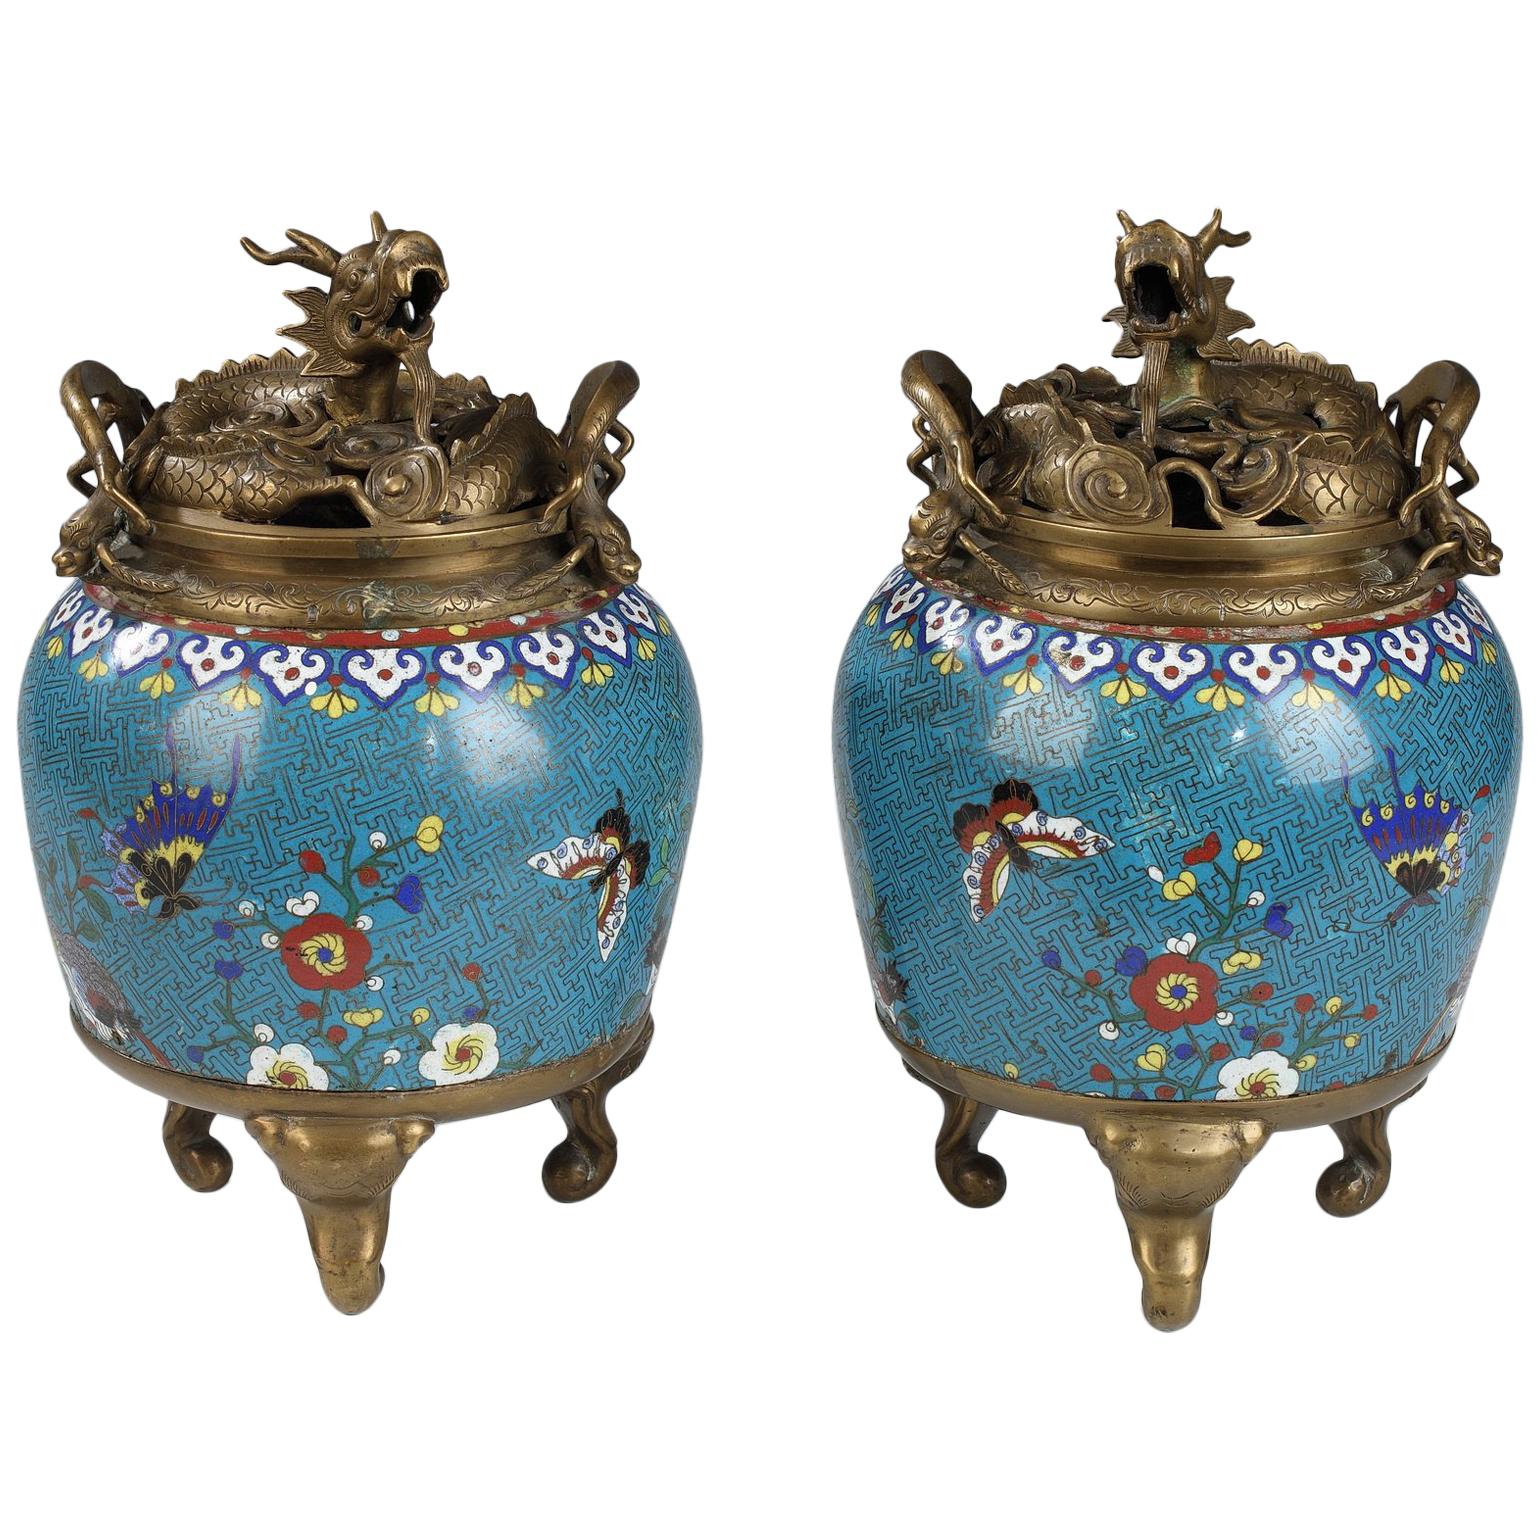 Lovely Chinese Cloisonné Enamel Pair of Jars, China, Early 19th Century For Sale